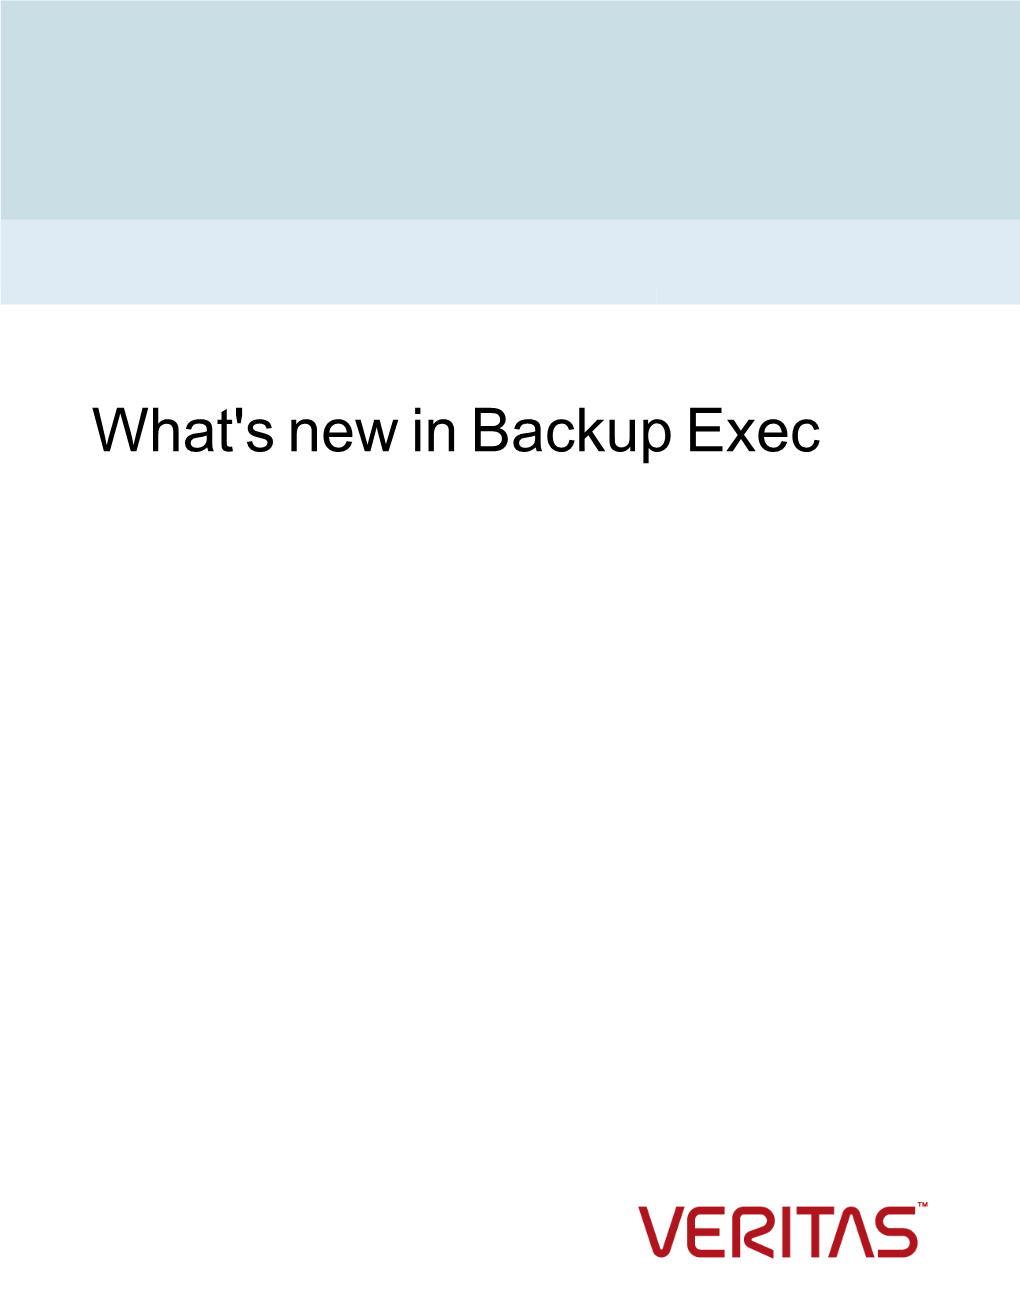 What's New in Backup Exec Releases and Its Feature Packs